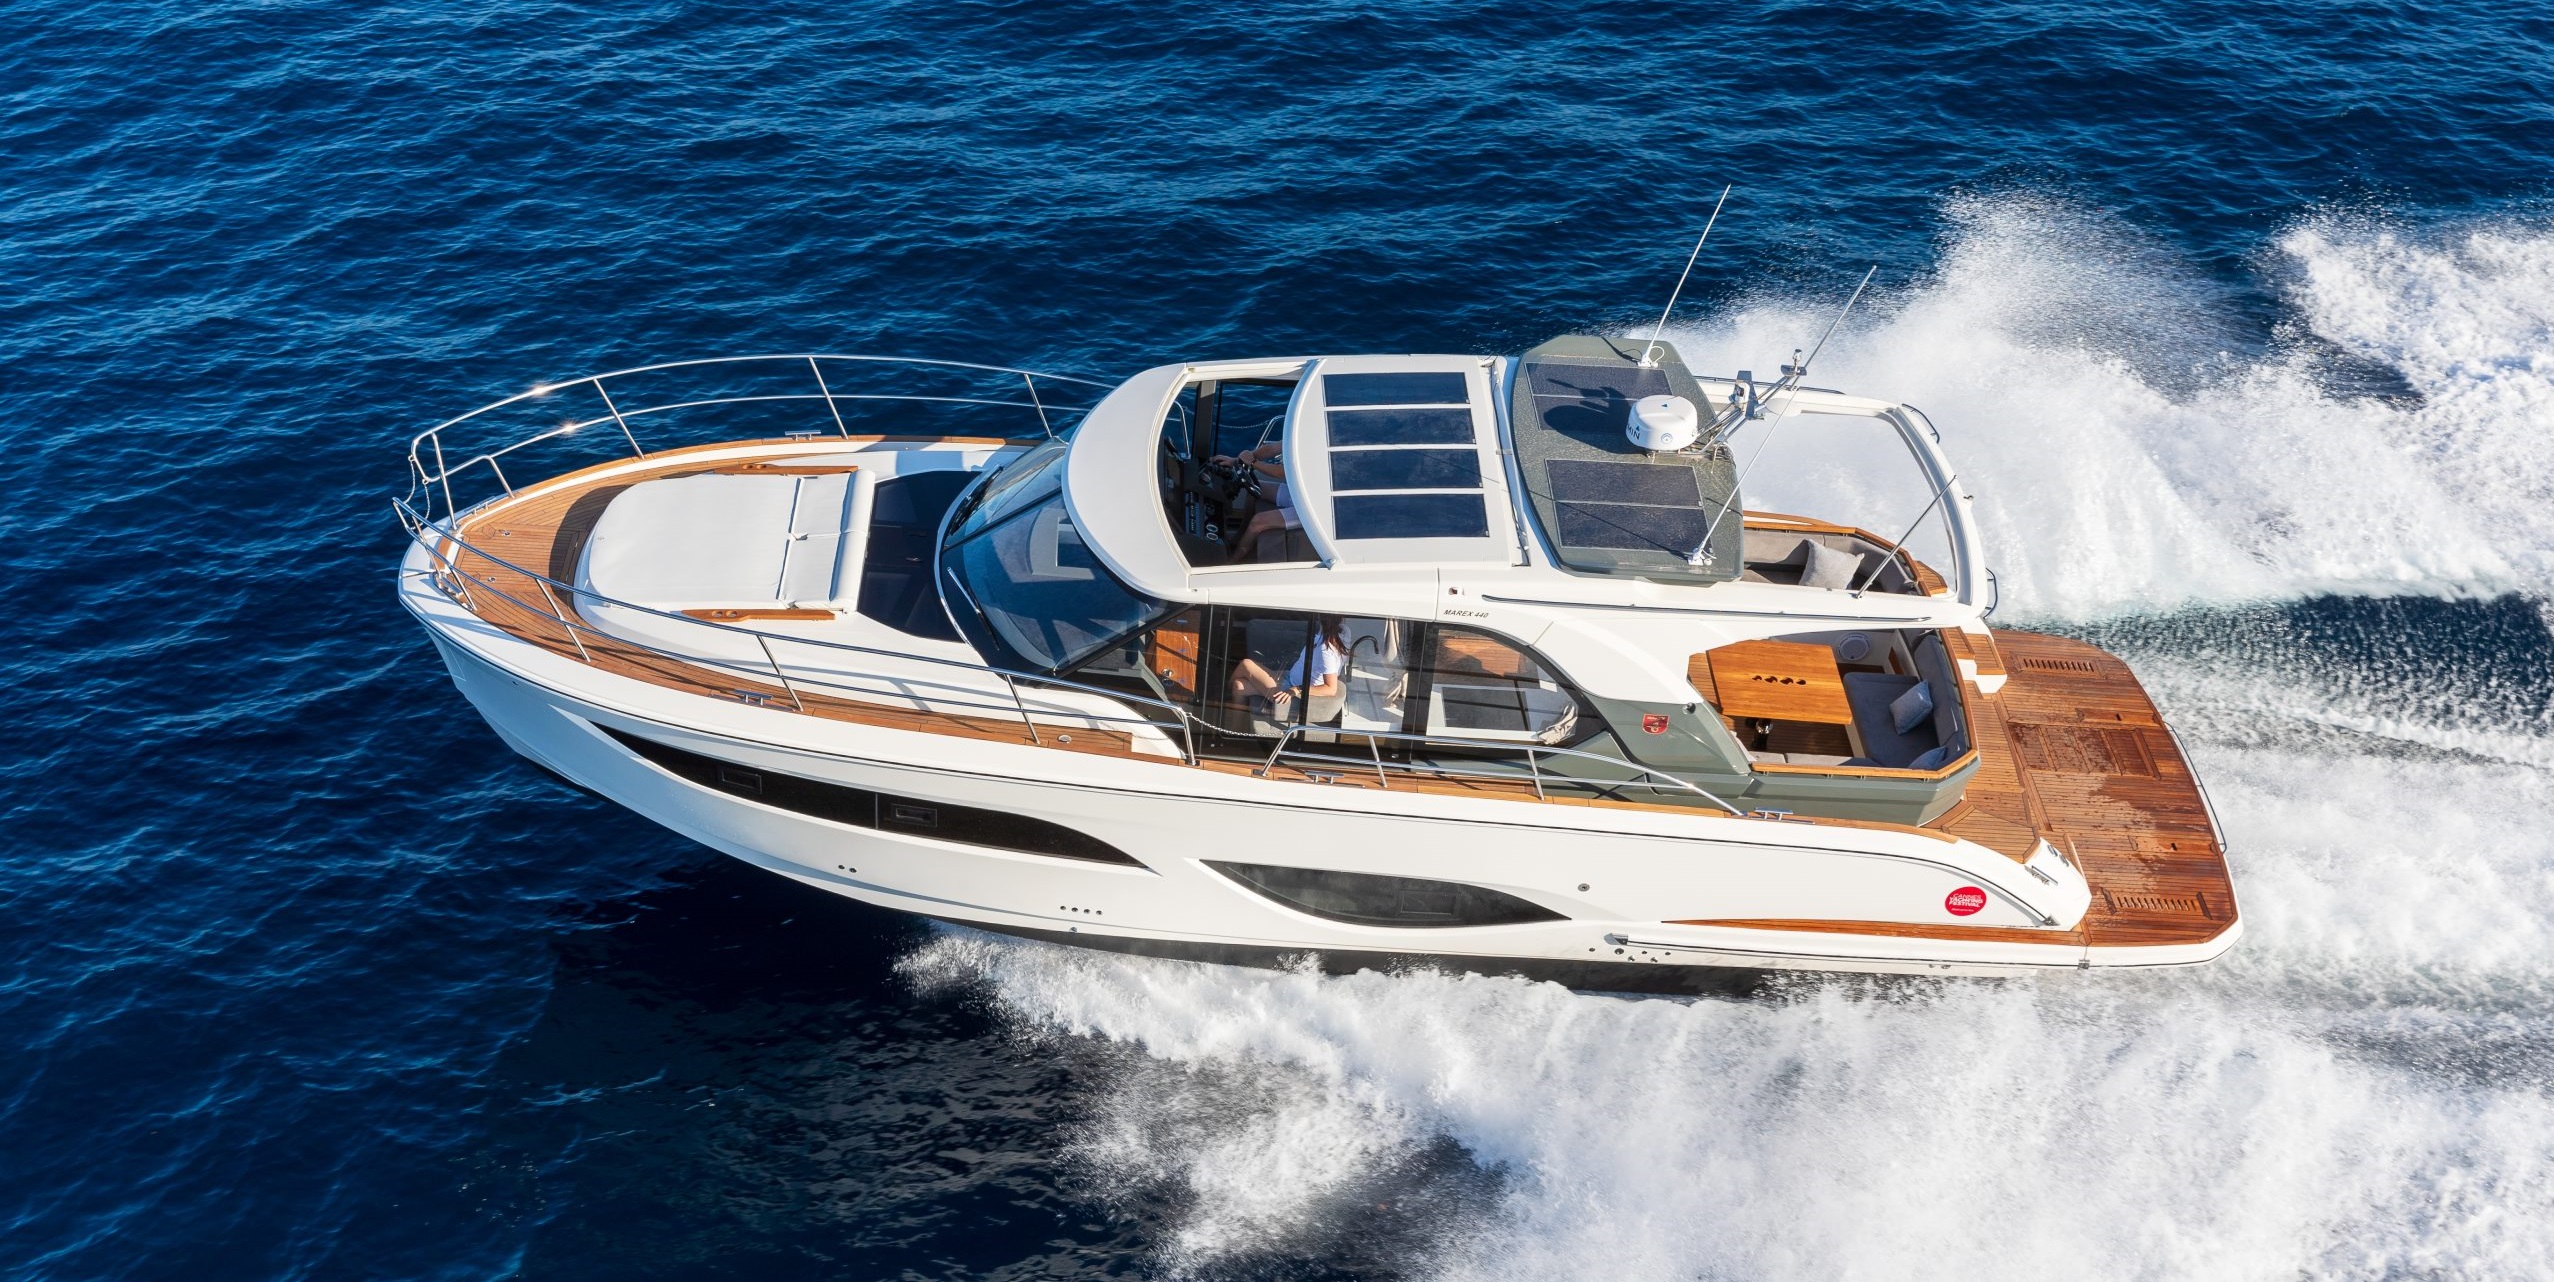 The Marex 440 GC motorboat – a sporty 44-foot yacht from the Norwegian shipyard – is sailing across the sea at high speed. To the right and left of the boat, the water is splashing.